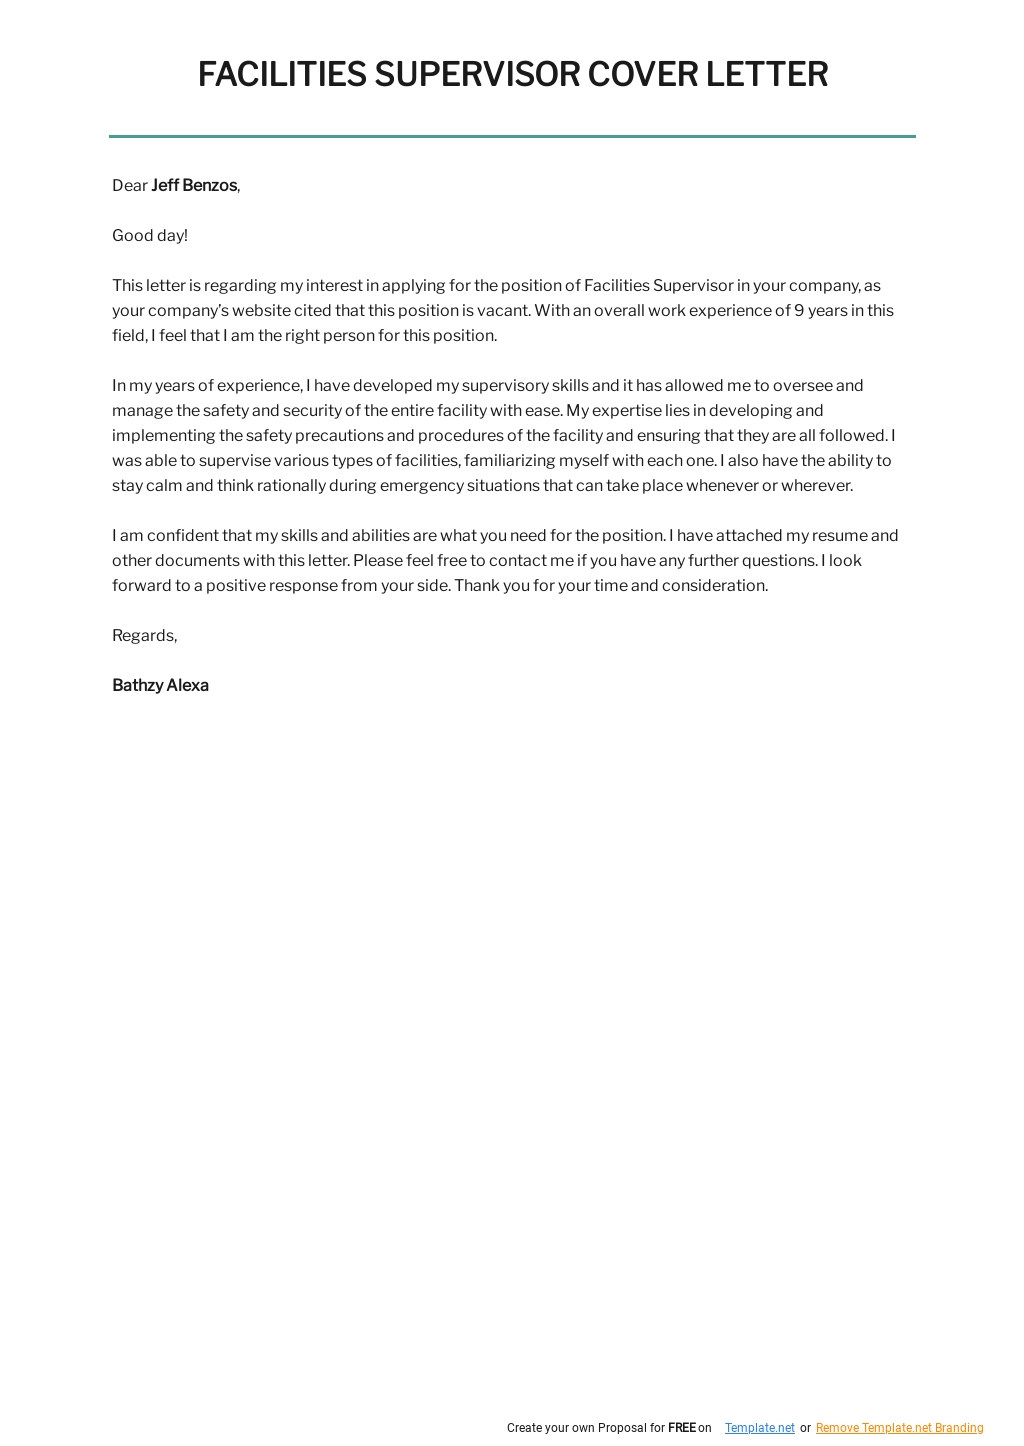 Facilities Supervisor Cover Letter Template.jpe